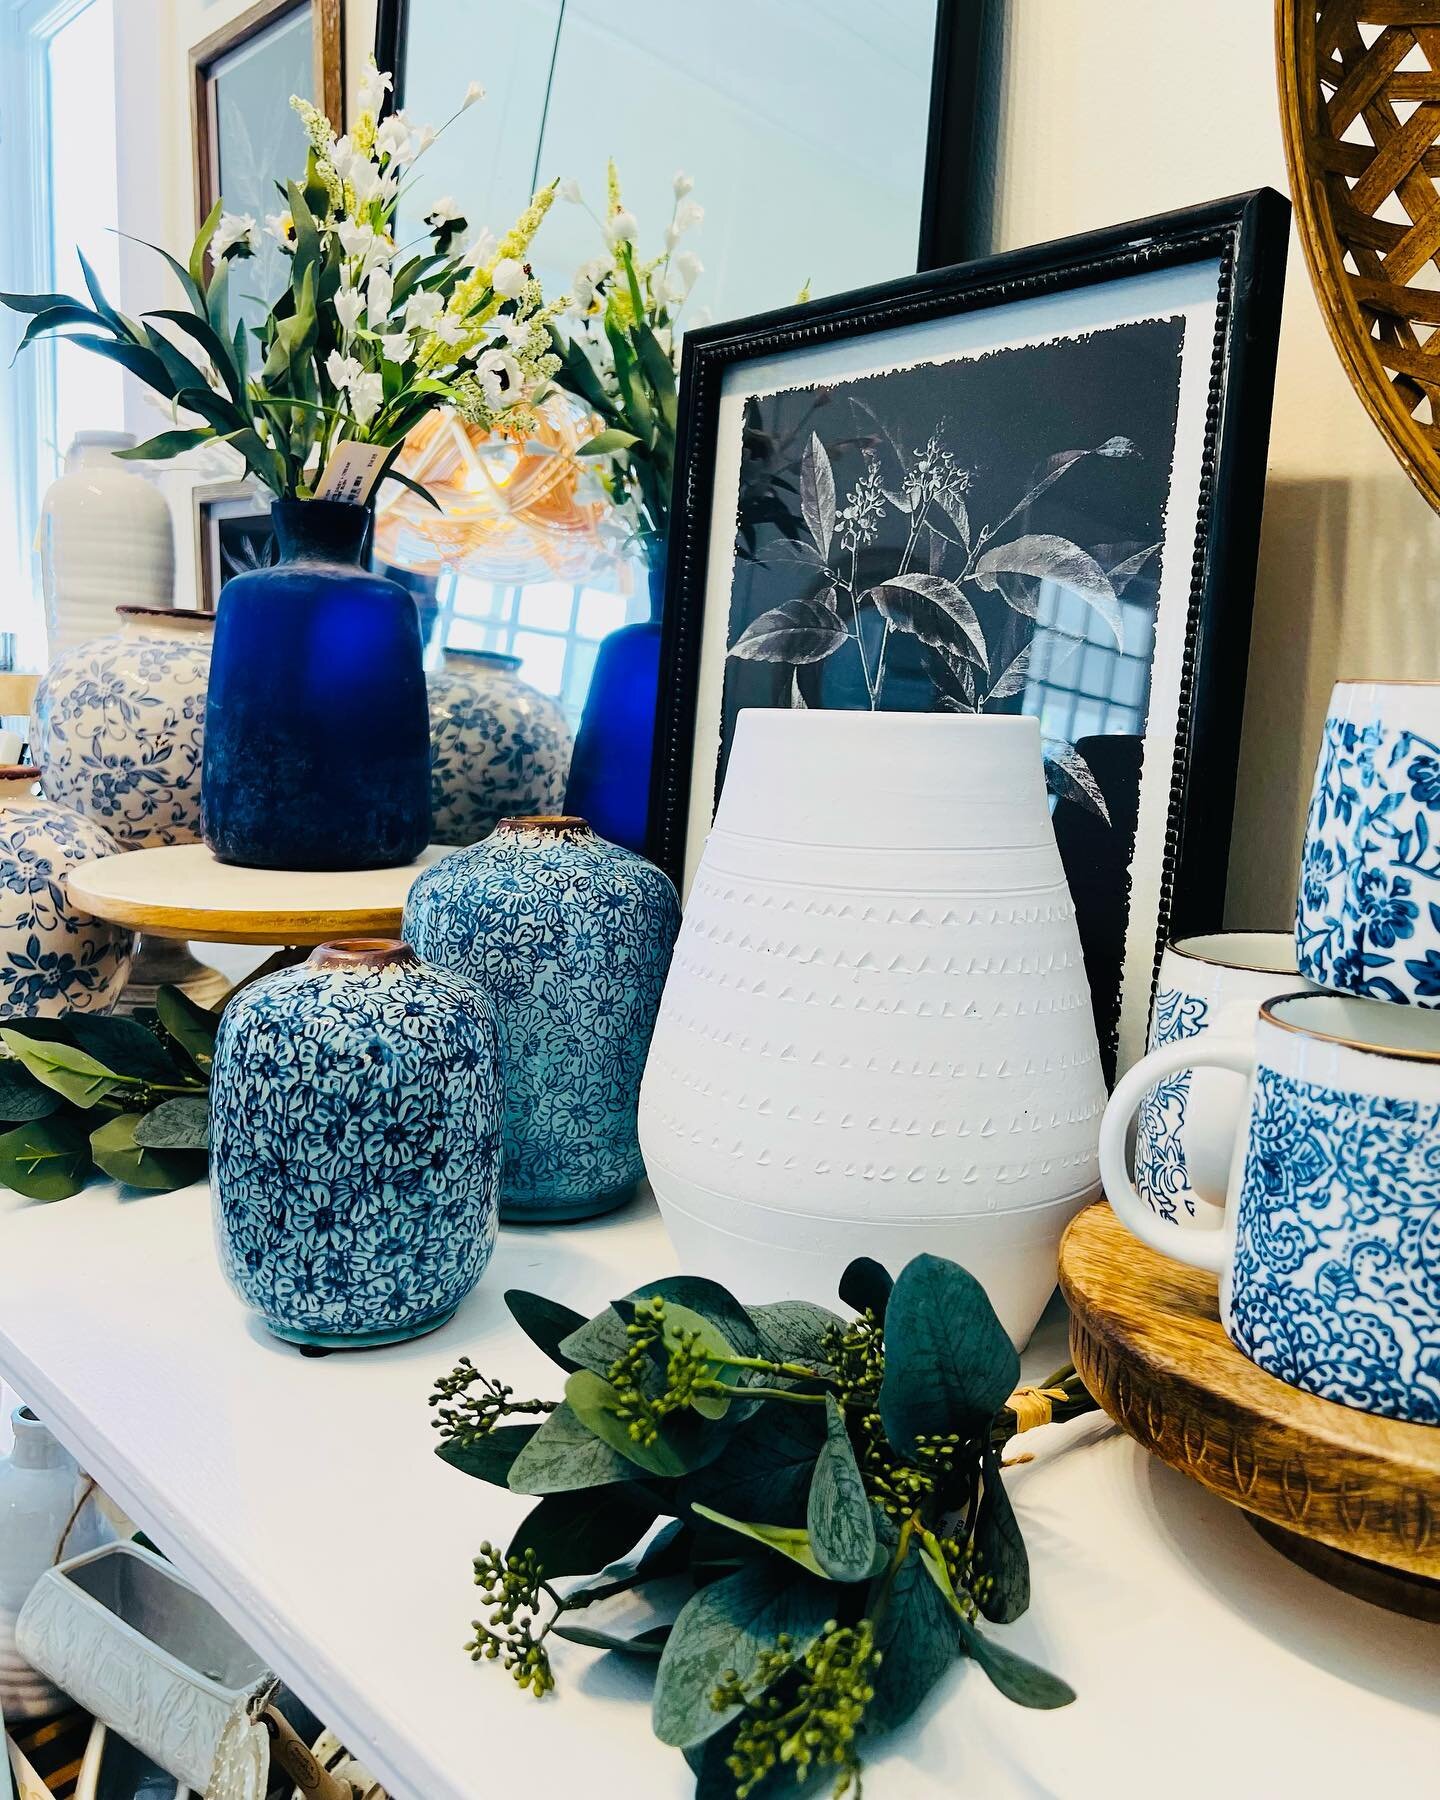 These blue patterns 🤍
.
.
#farmhouseliving #homelovers #ilovemyhome #farmhousedecorating #farmhousetable #fixerupperstyle #sweetandsouthernfinds #aliltownalottalove #shopsmallbusiness #taylortx #homedesign #farmhouselove #homelove #loveyourhome #hom